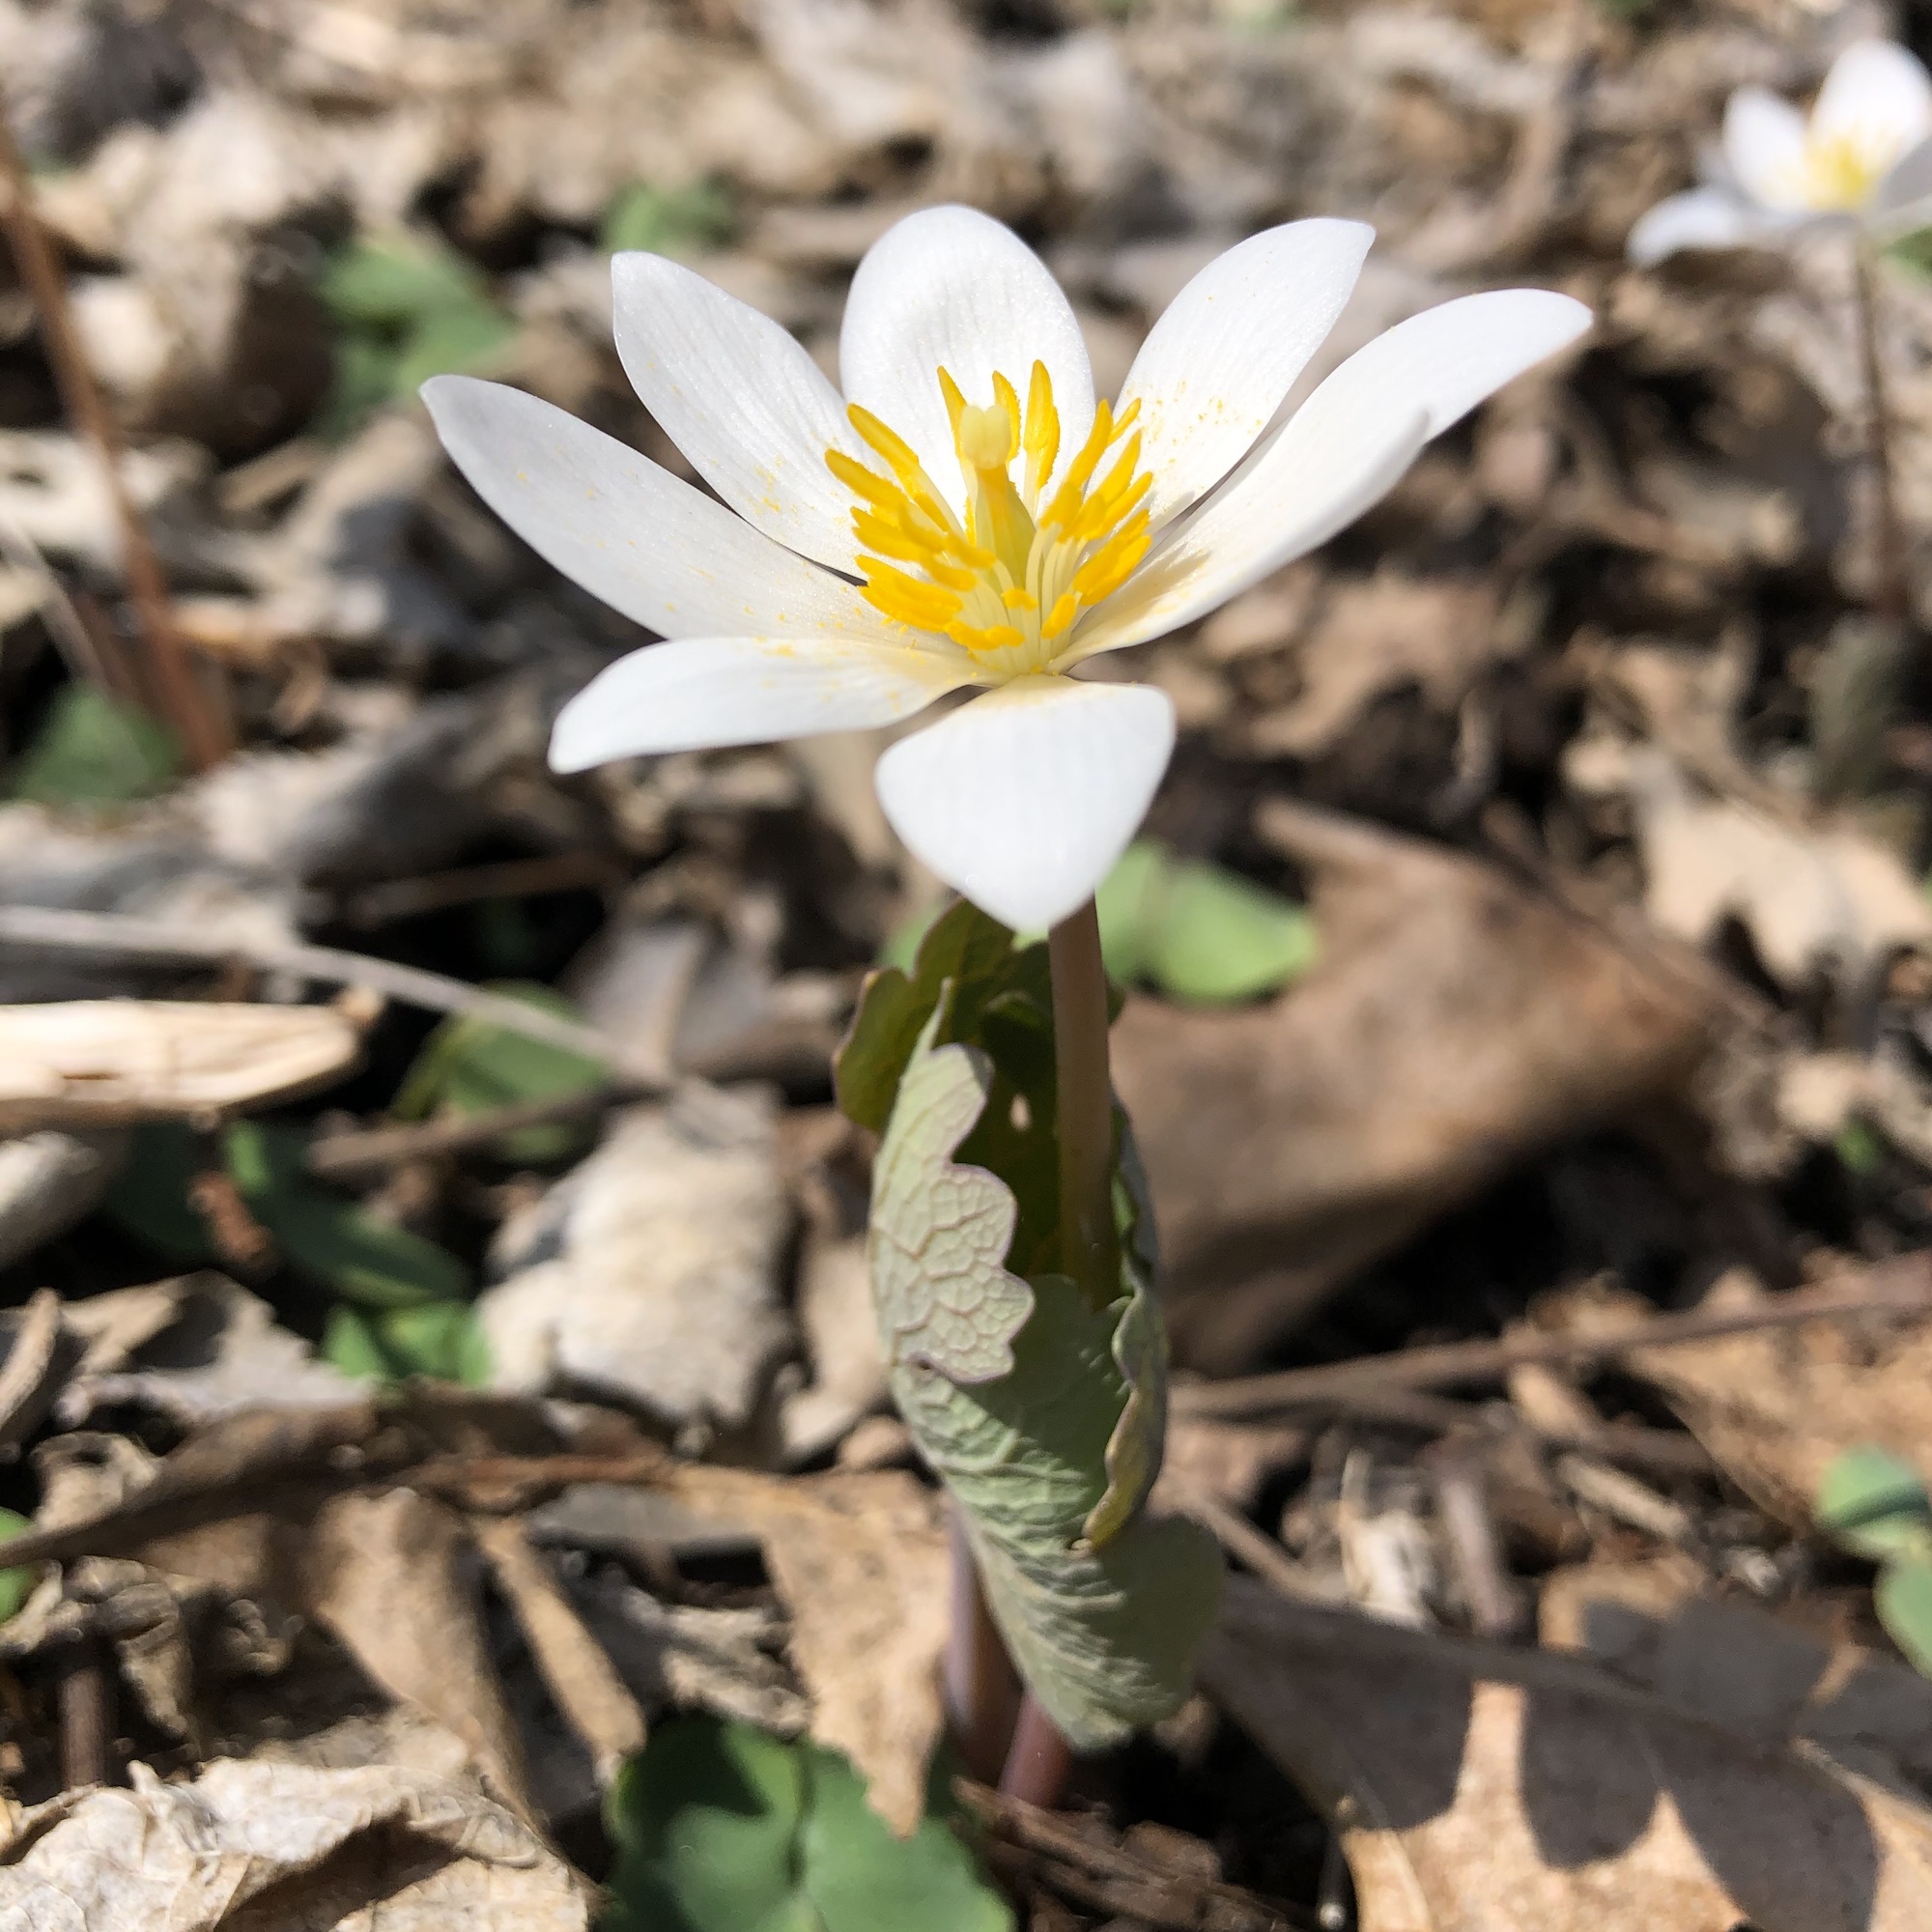 Bloodroot in Oak Savanna by Council Ring in Madison, Wisconsin on April 7, 2020.